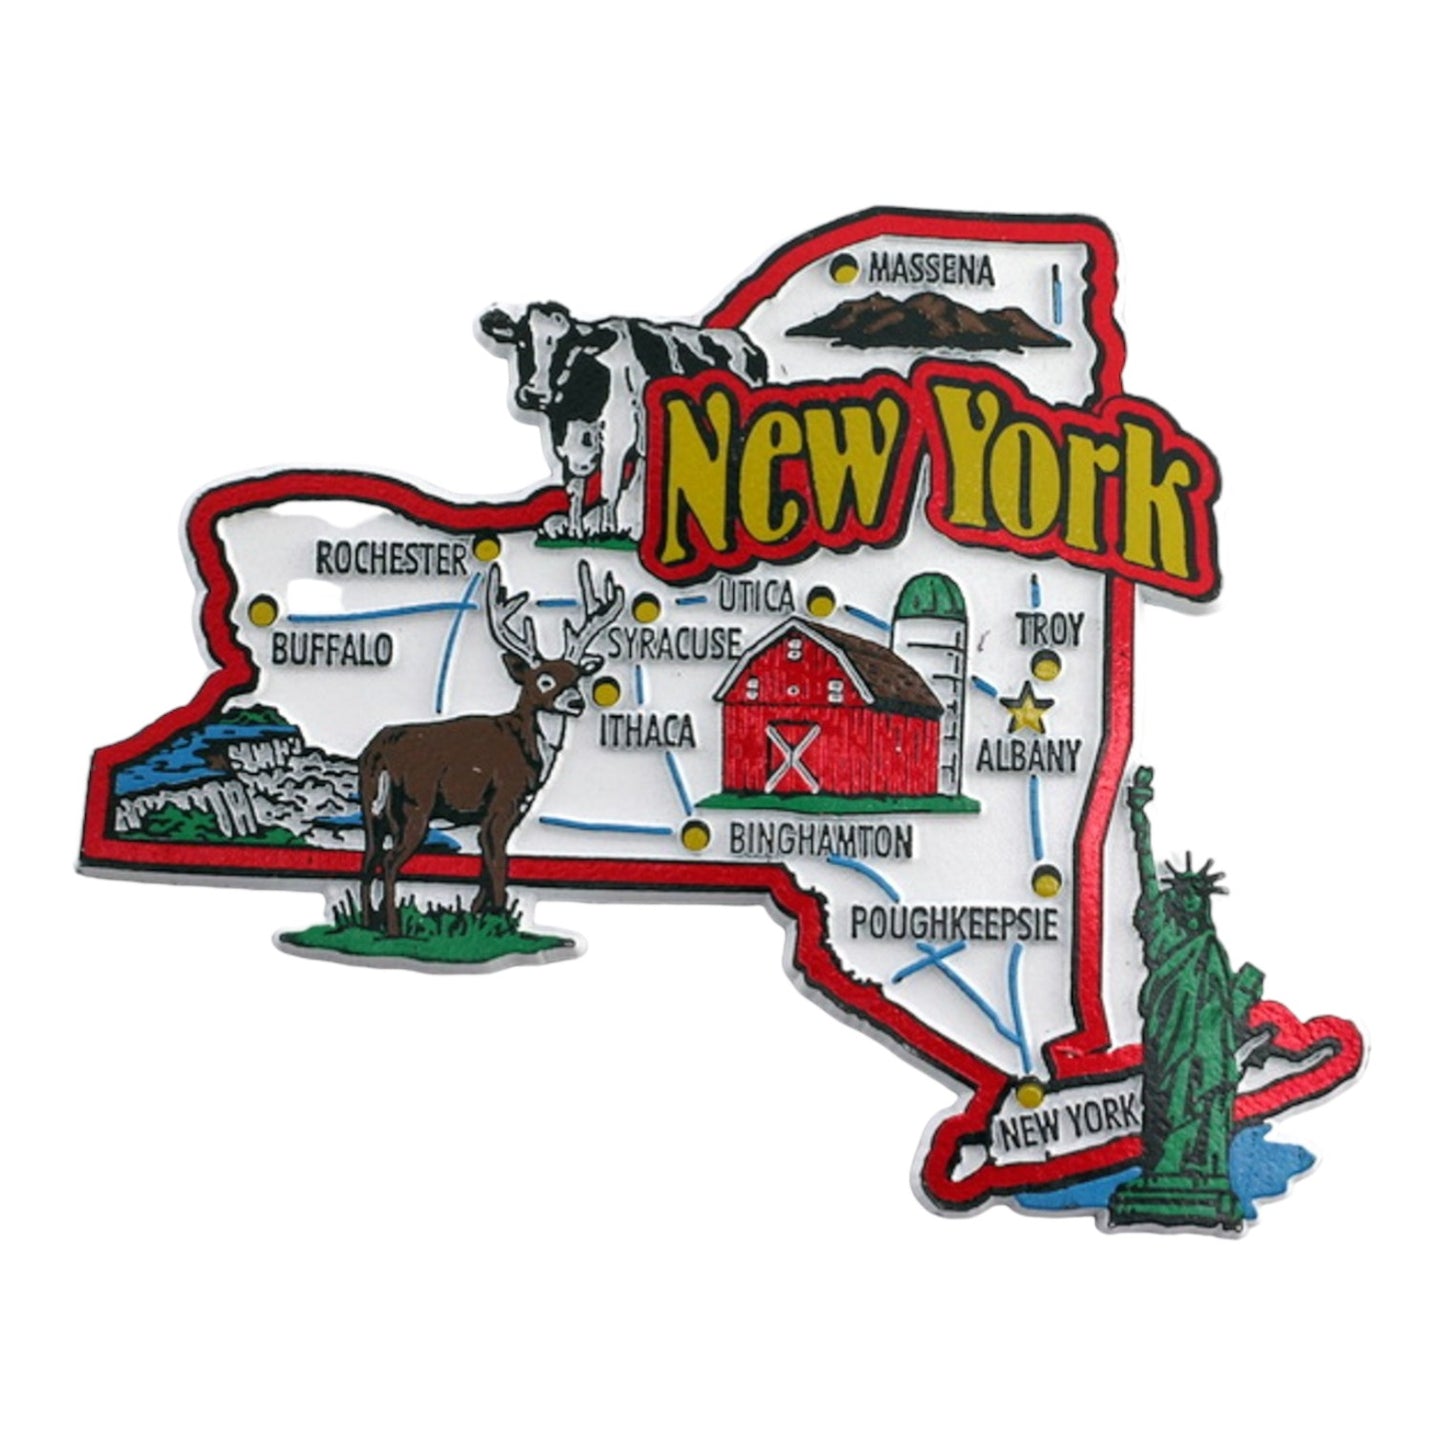 New York State Map and Landmarks Collage Fridge Souvenir Collectible Magnet